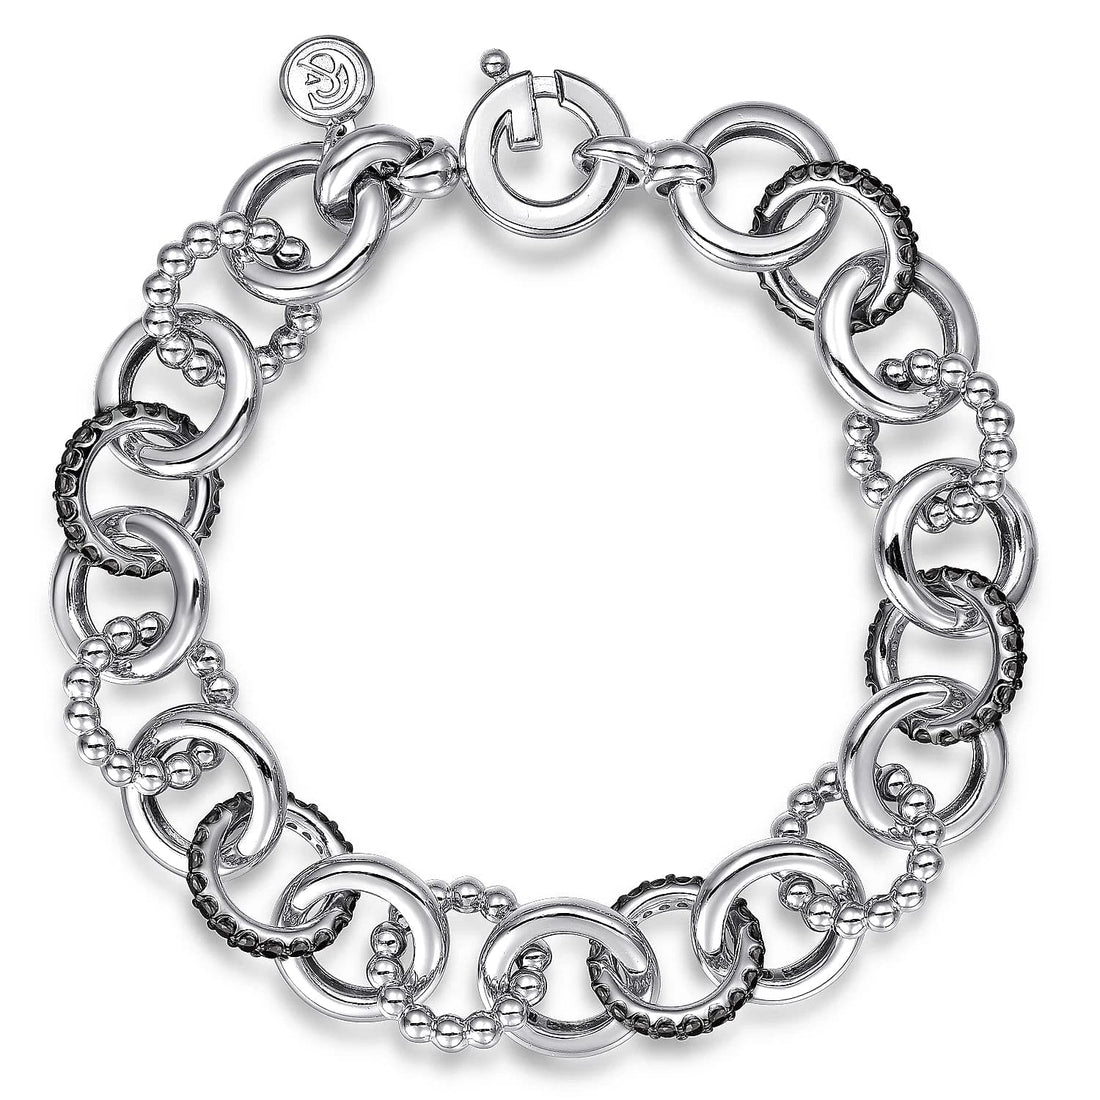 Buy quality 925 sterling silver daily wear / casual bracelet for men in  Ahmedabad